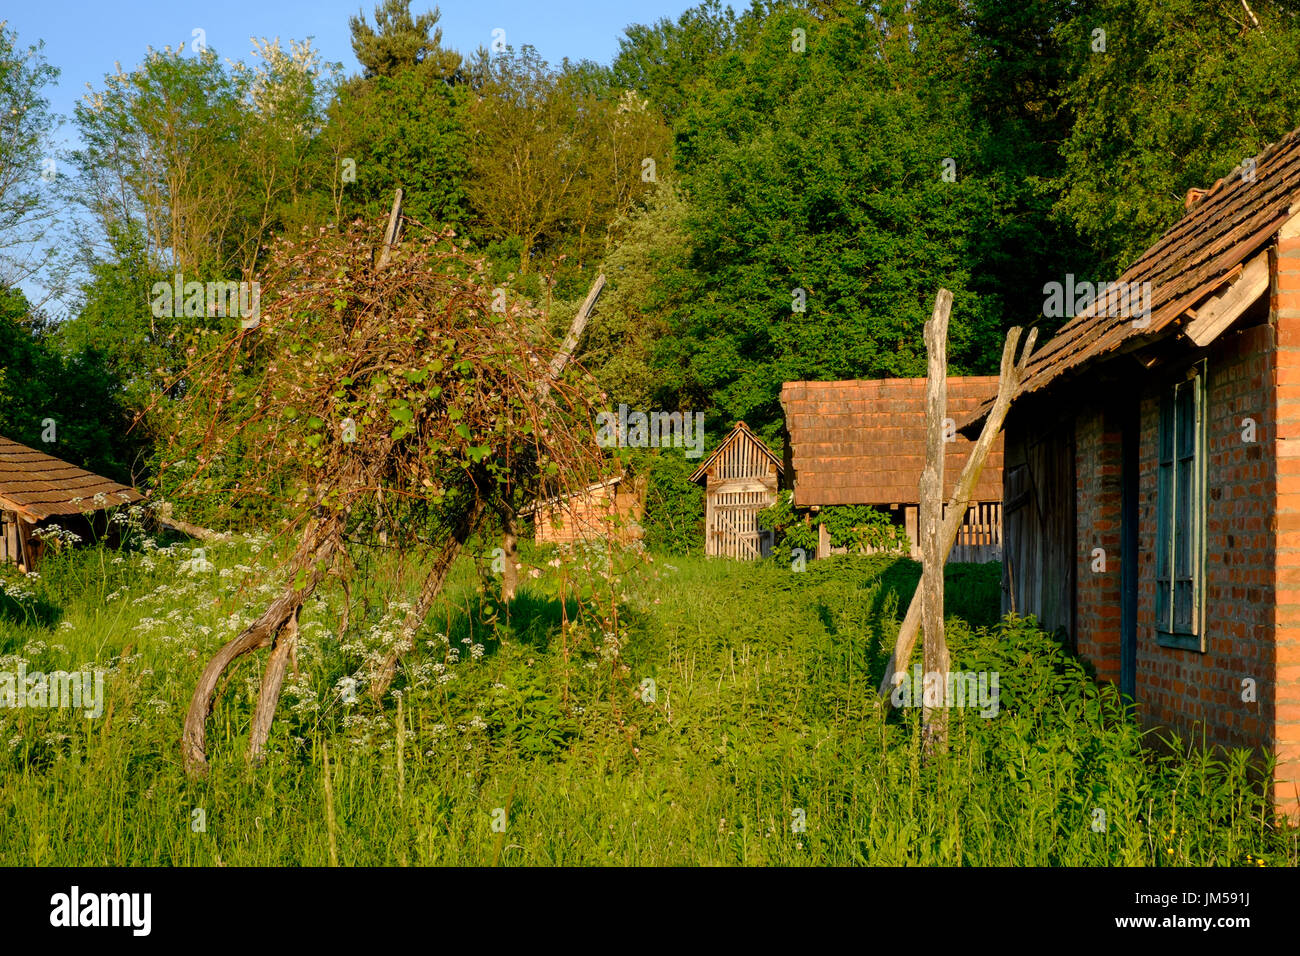 outbuildings in the garden of a typical rural village house in zala county hungary Stock Photo